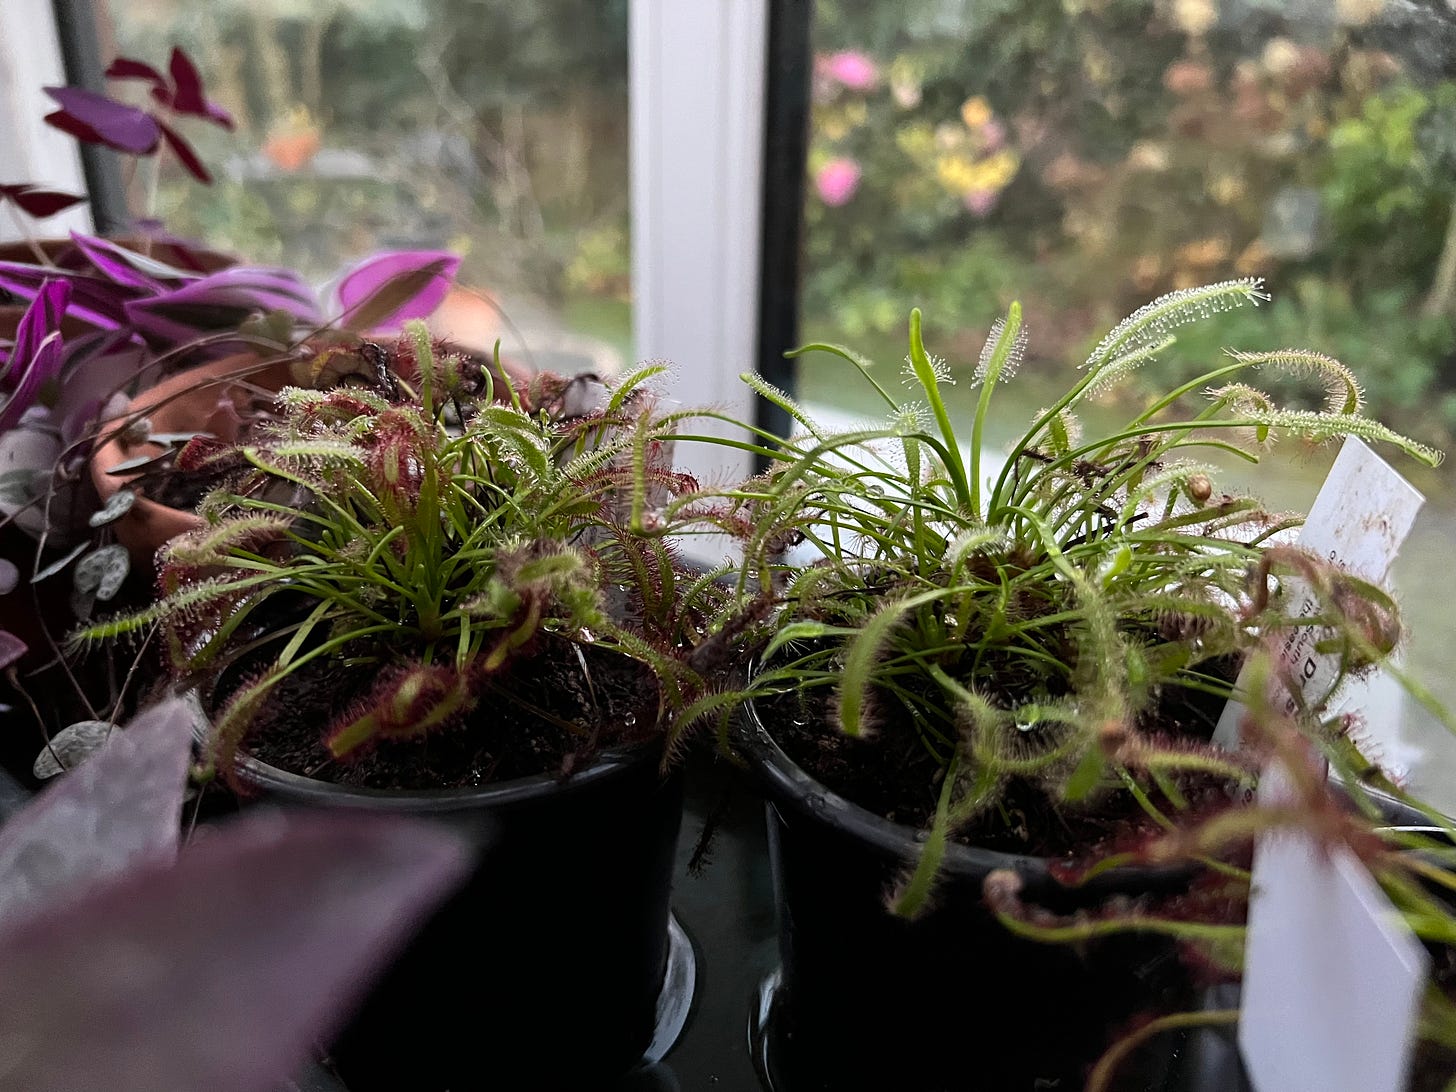 A pair of sundew plants on a windowsill, one with green leaves and one with red-tinged leaves; they are surrounded by other houseplants